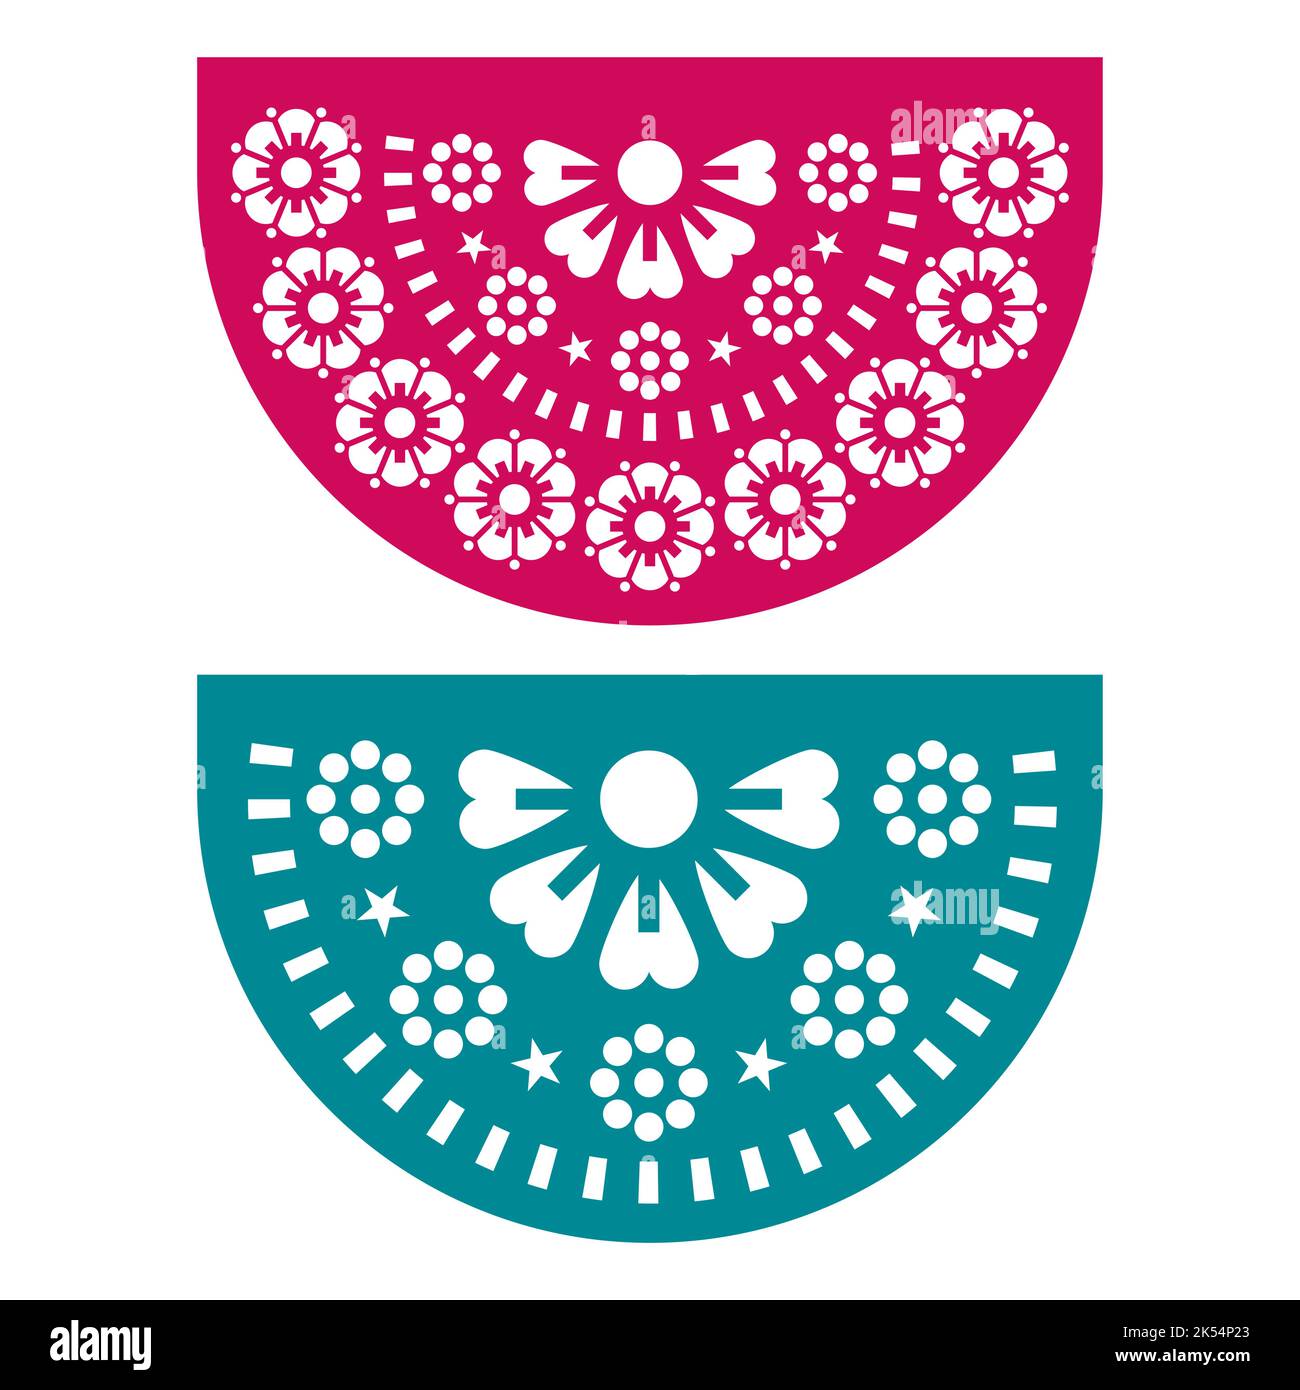 Papel Picado vector design set of two party decorations, Mexican fiesta garland decor with flowers and geometric shapes Stock Vector